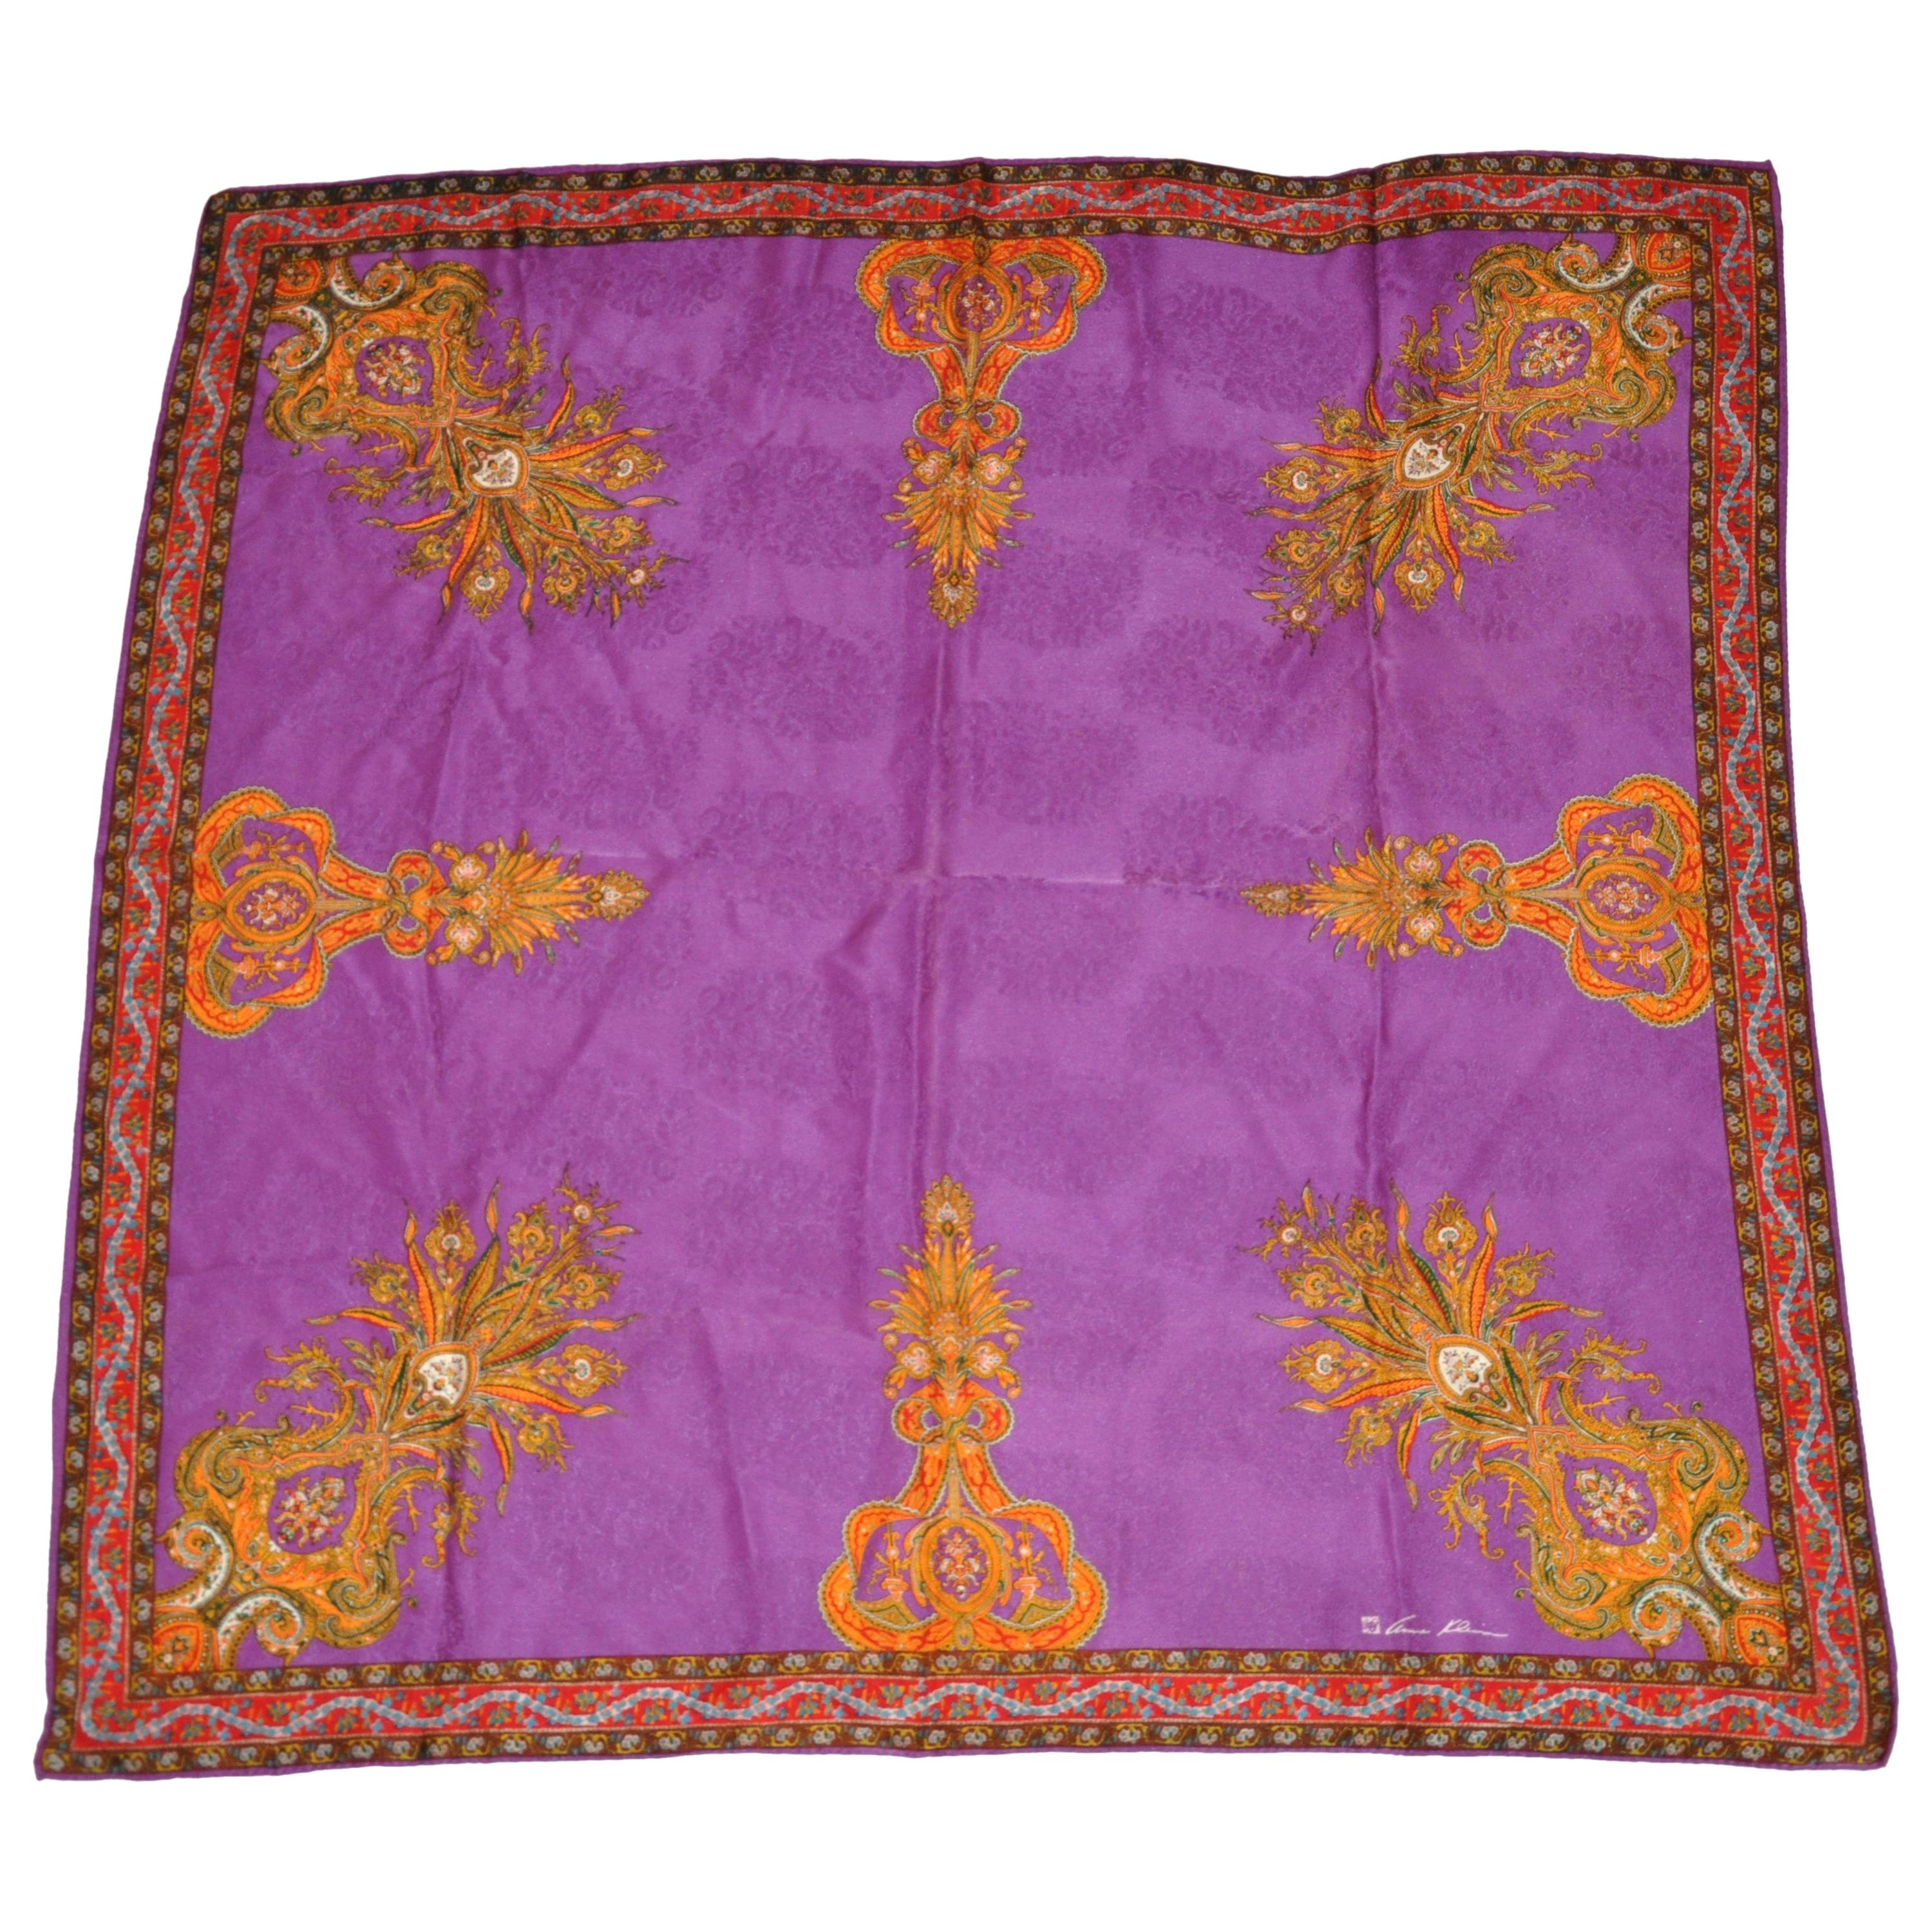 Anne Klein Glorious Rich Colorful Violet with Palsey Detailing Silk Scarf